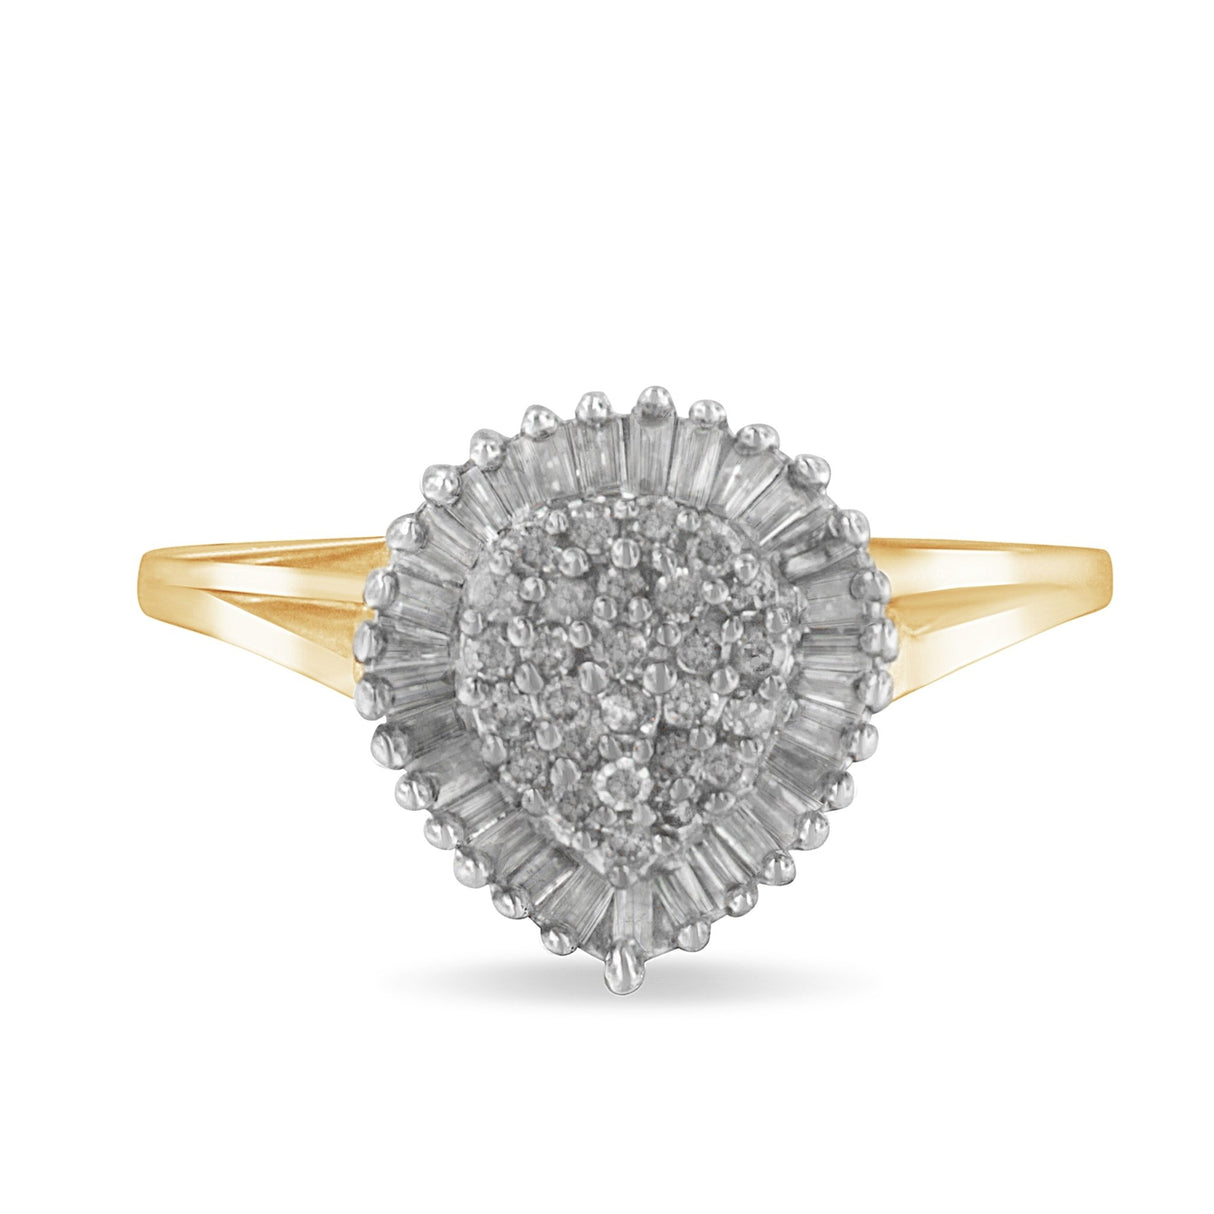 10K Yellow Gold 1/2 Cttw Round & Baguette Cut Diamond Pear Shaped Domed Pavé Cluster With Halo Cocktail Ring (J-K Color, I1-I2 Clarity) - Size 7-1/4 - Tuesday Morning-Rings